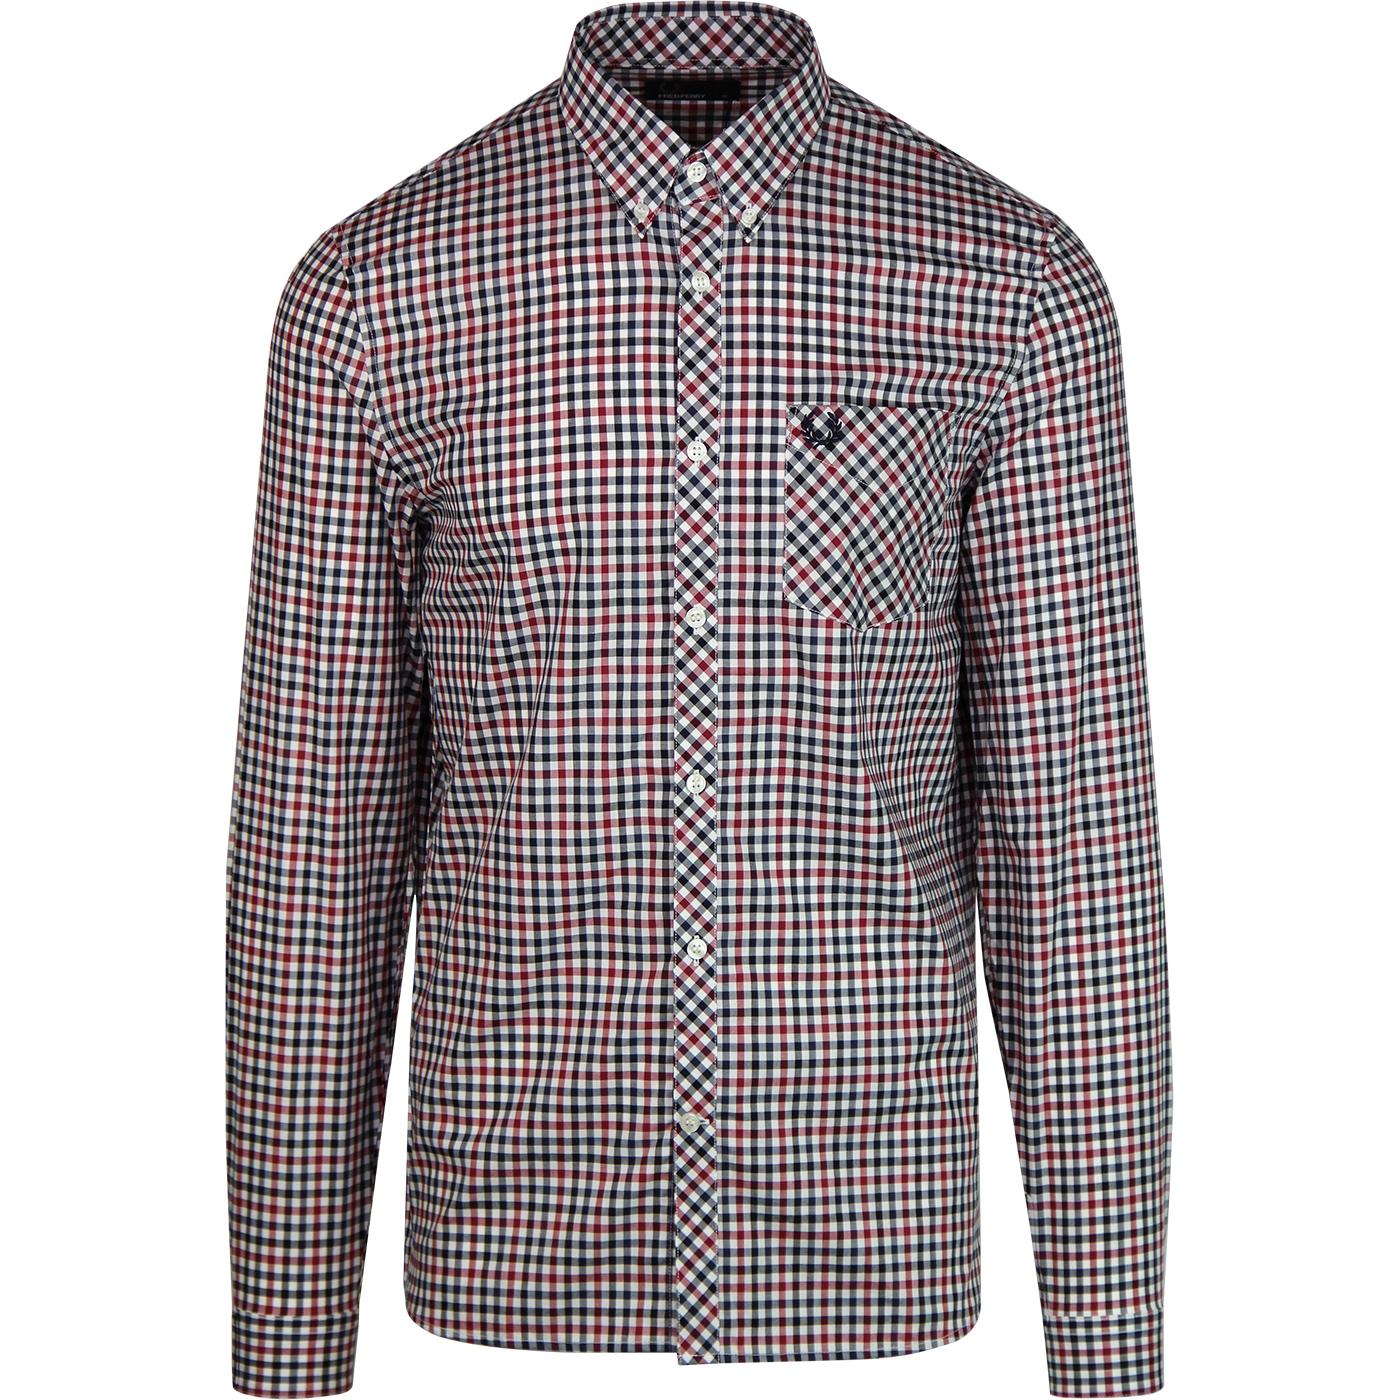 fred perry button down shirt